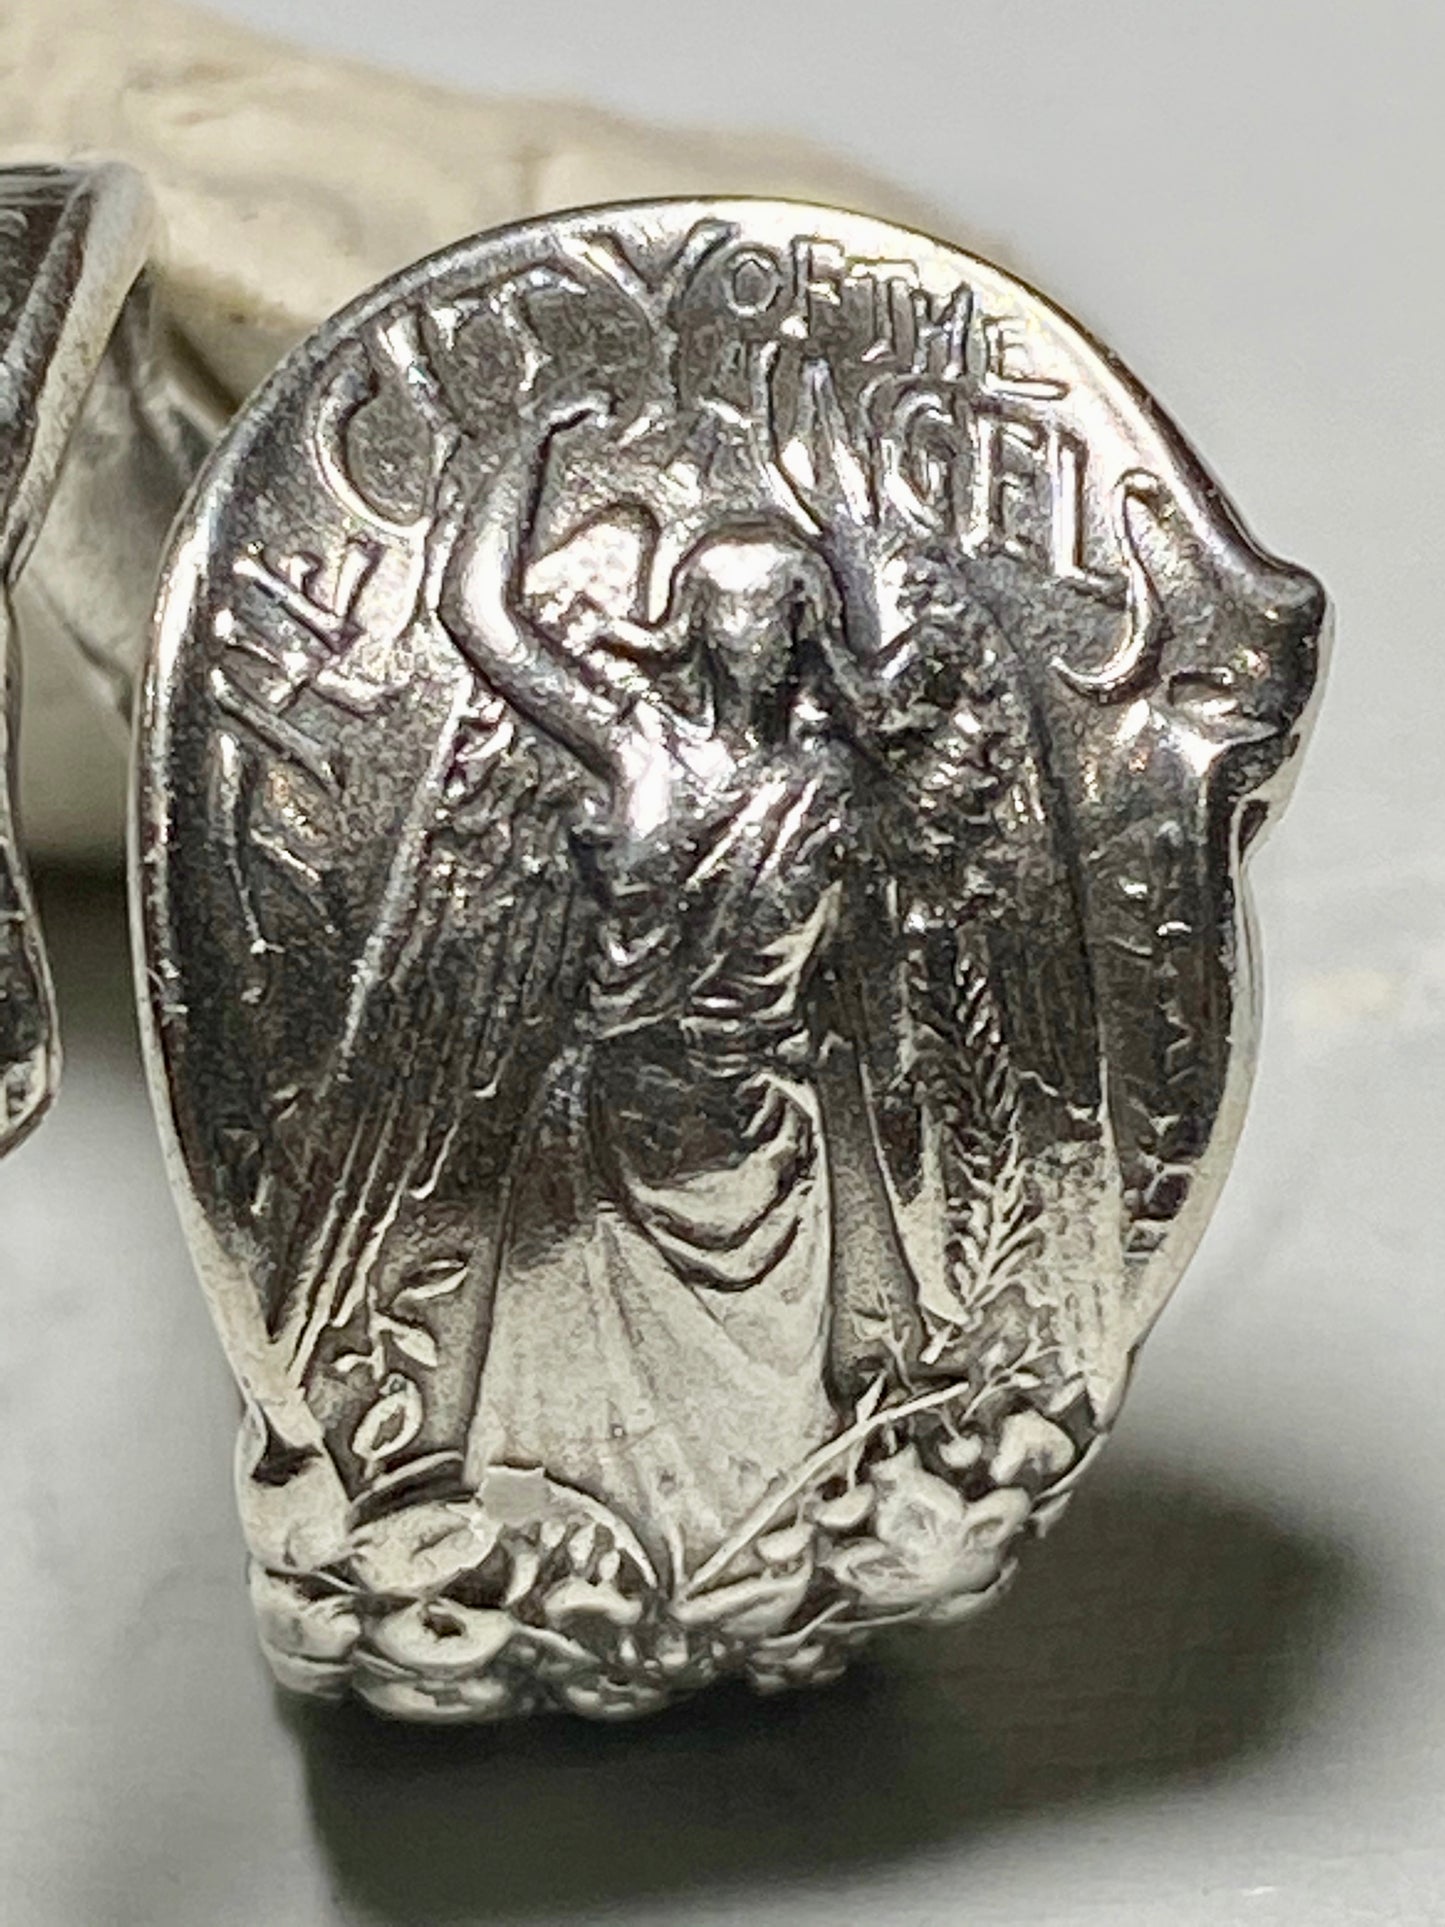 Spoon band Los Angeles City of Angels sterling silver ring